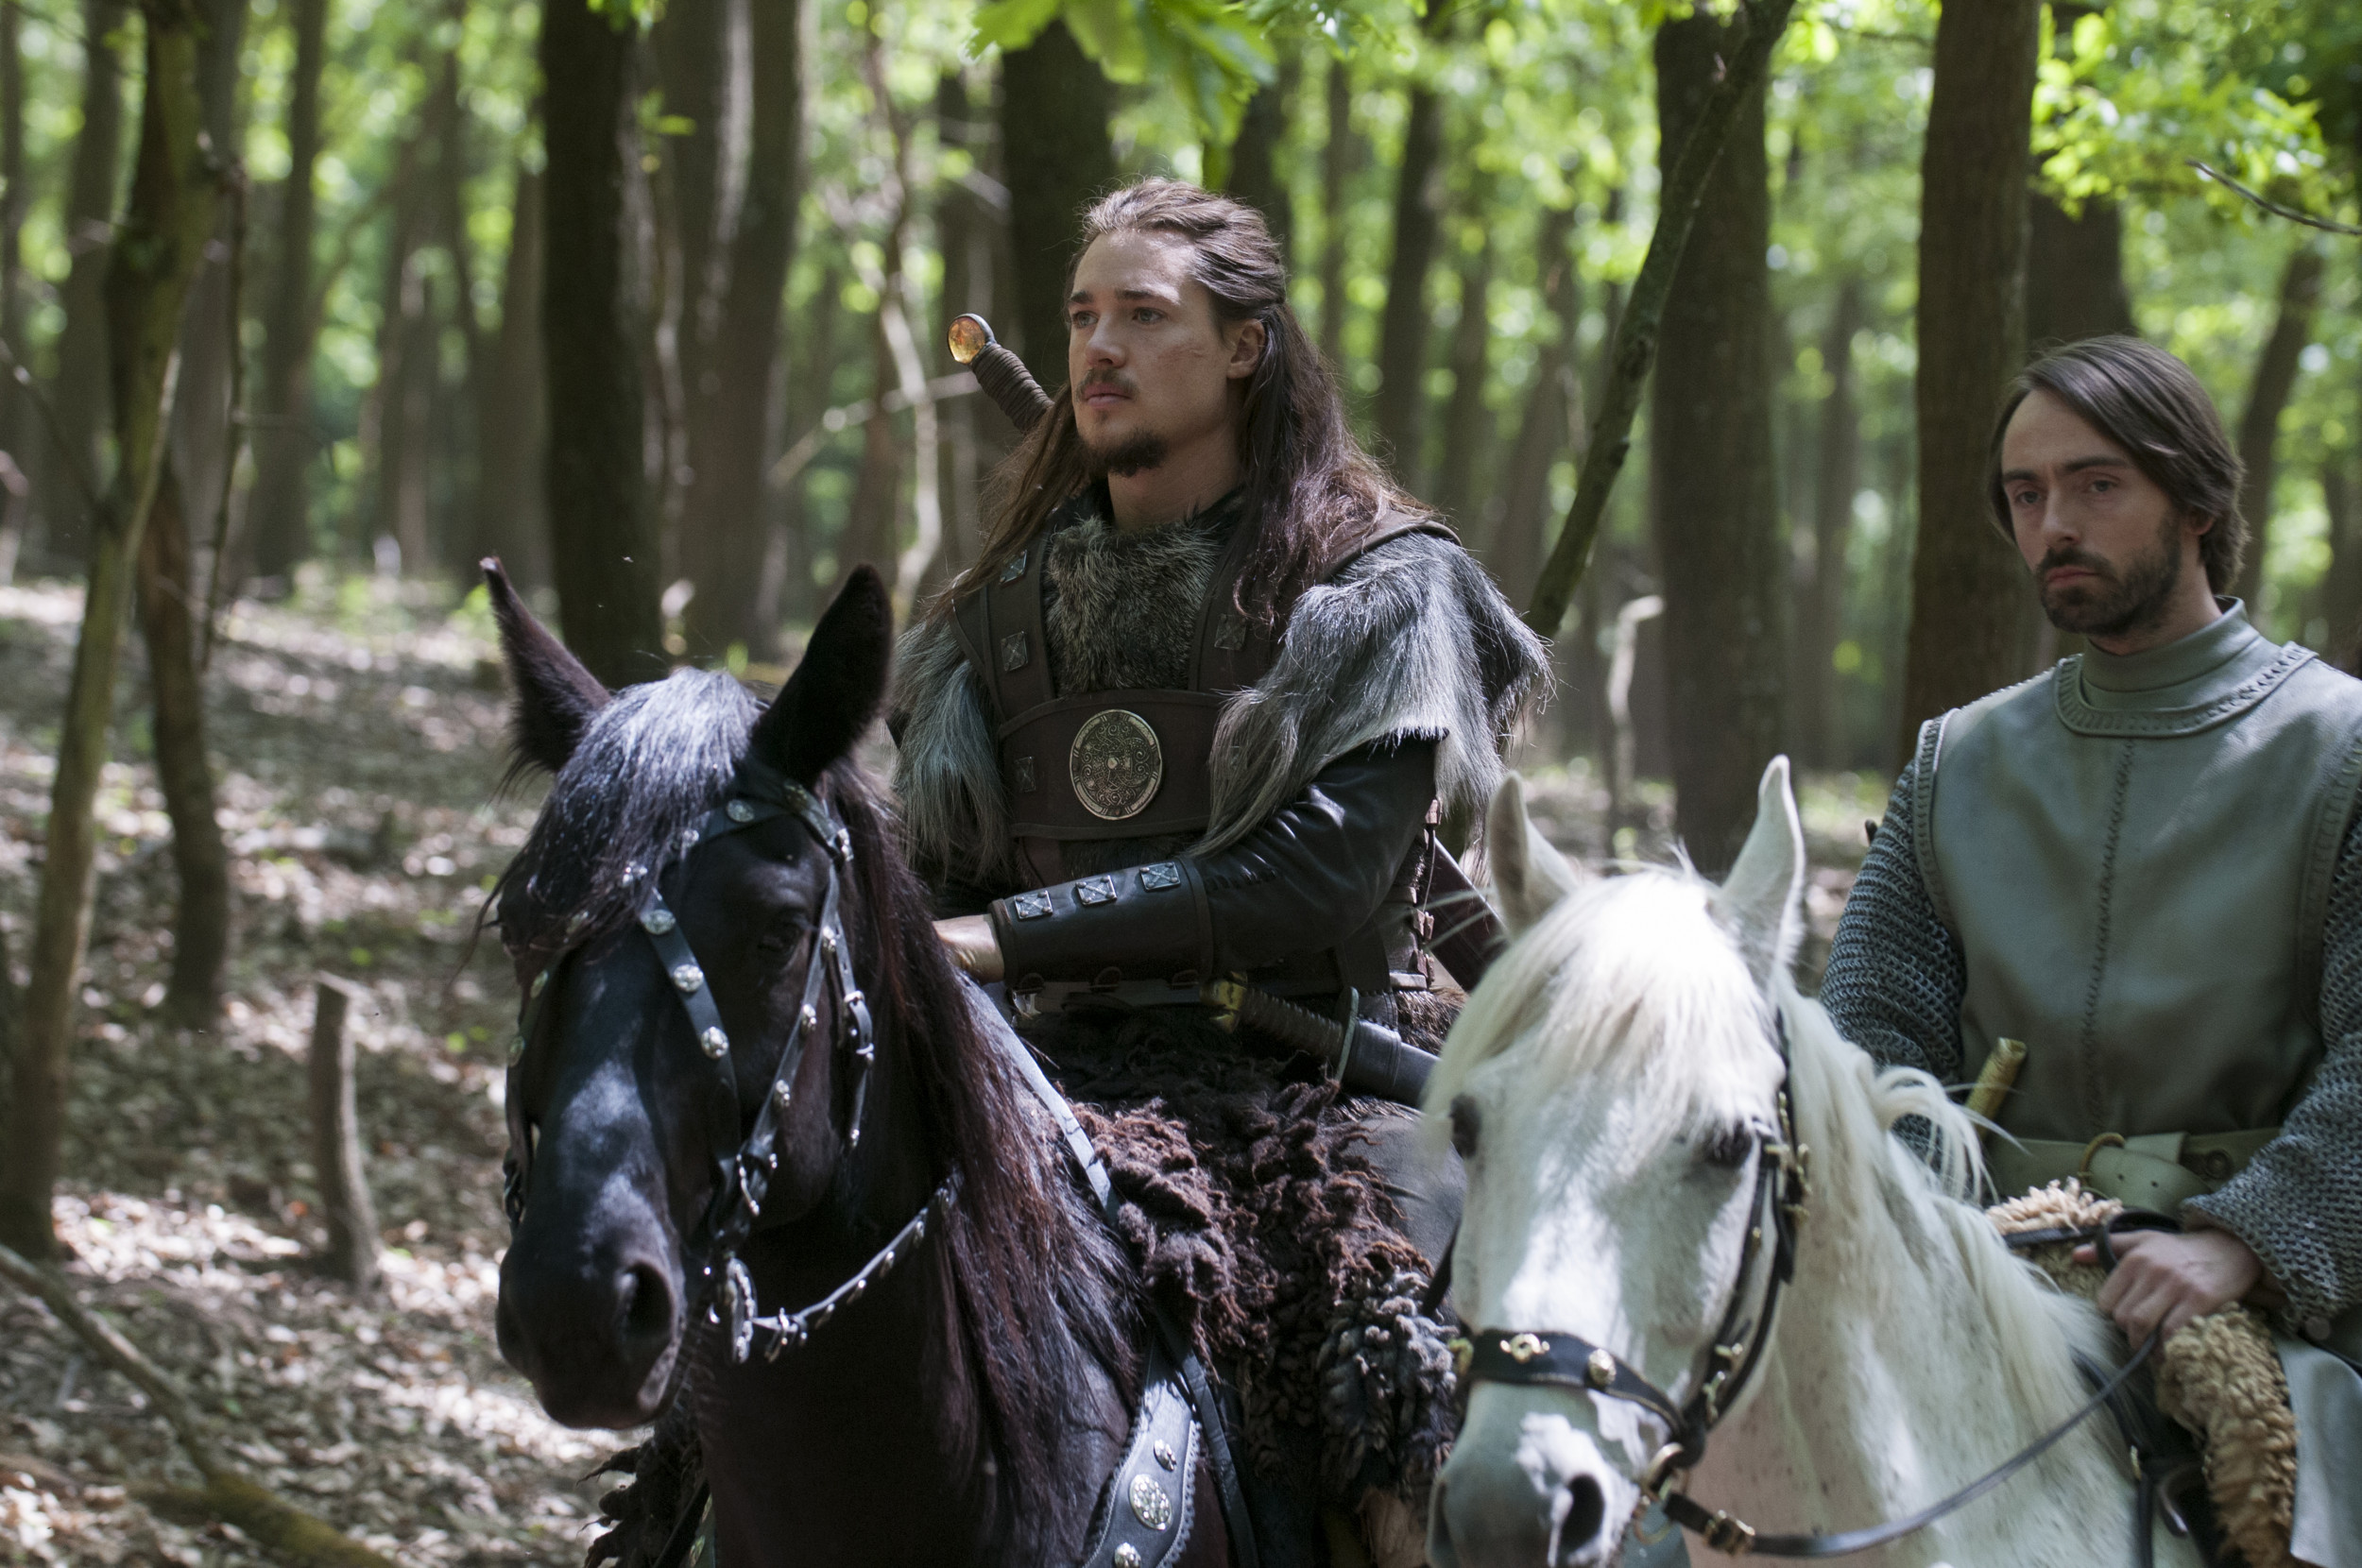 Uhtred the Bold, ealdorman of Northumbria